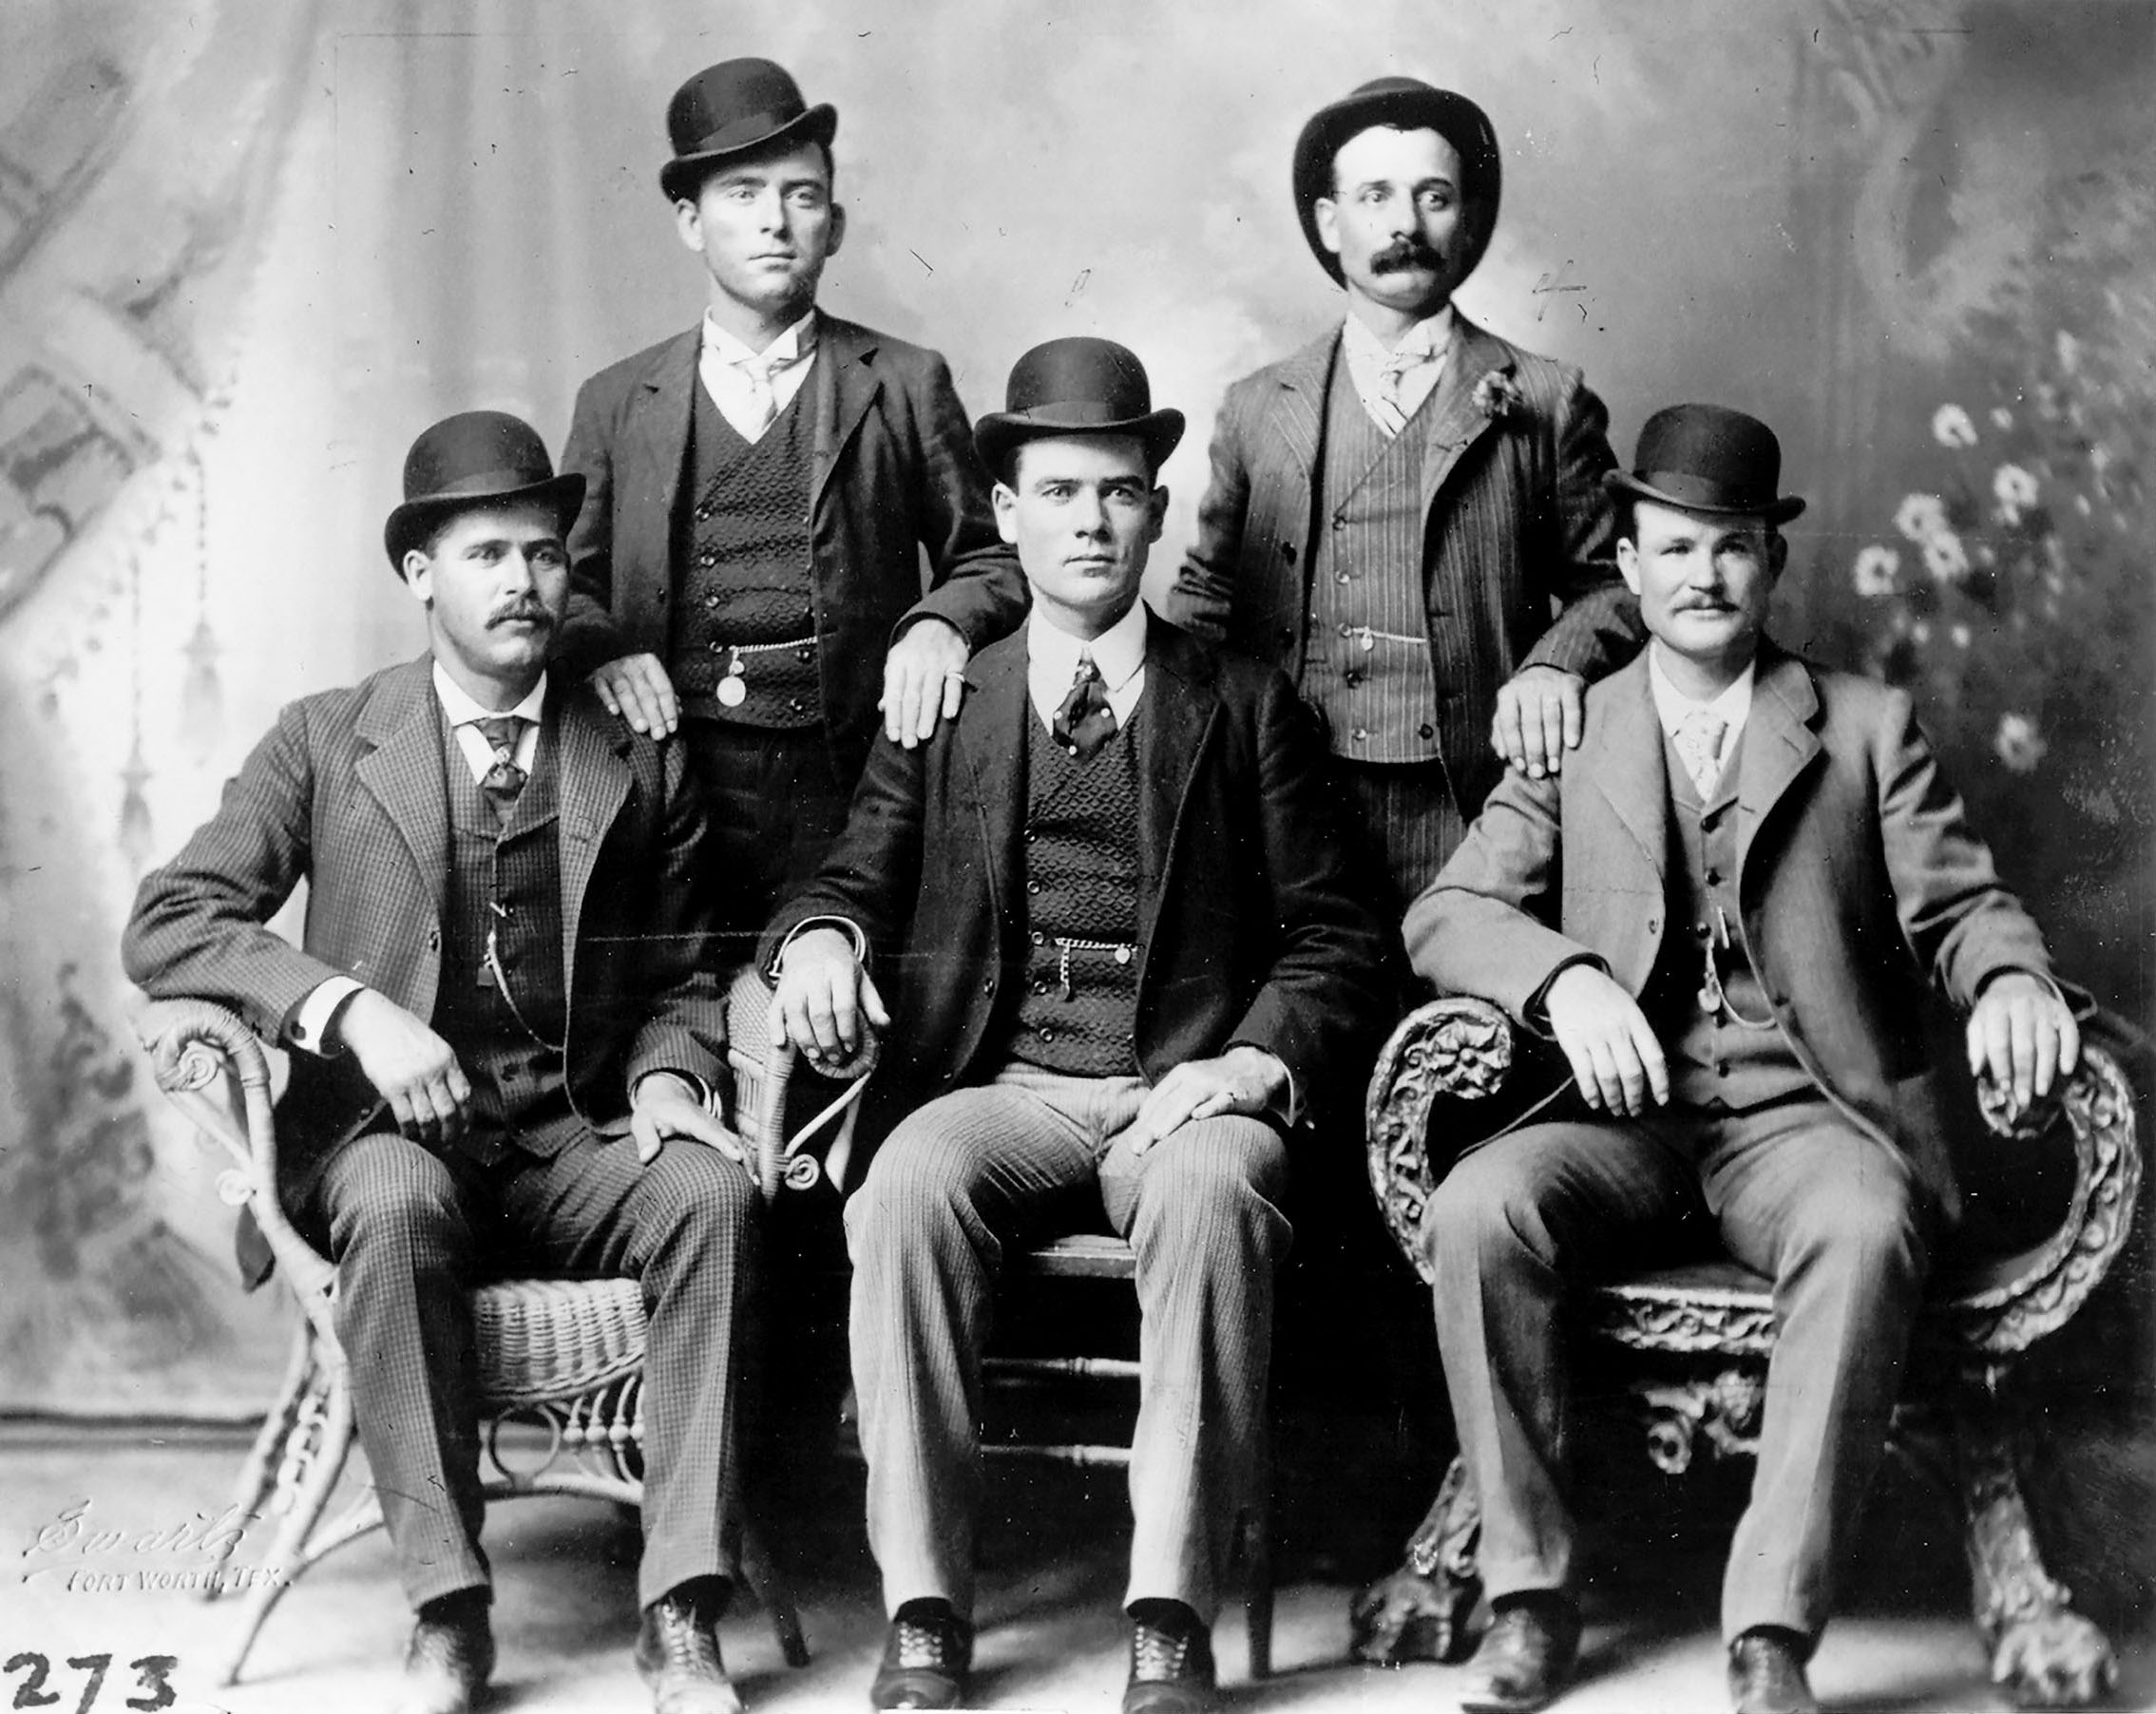 A black and white photograph of a group of men sitting on a bench wearing suits and hats